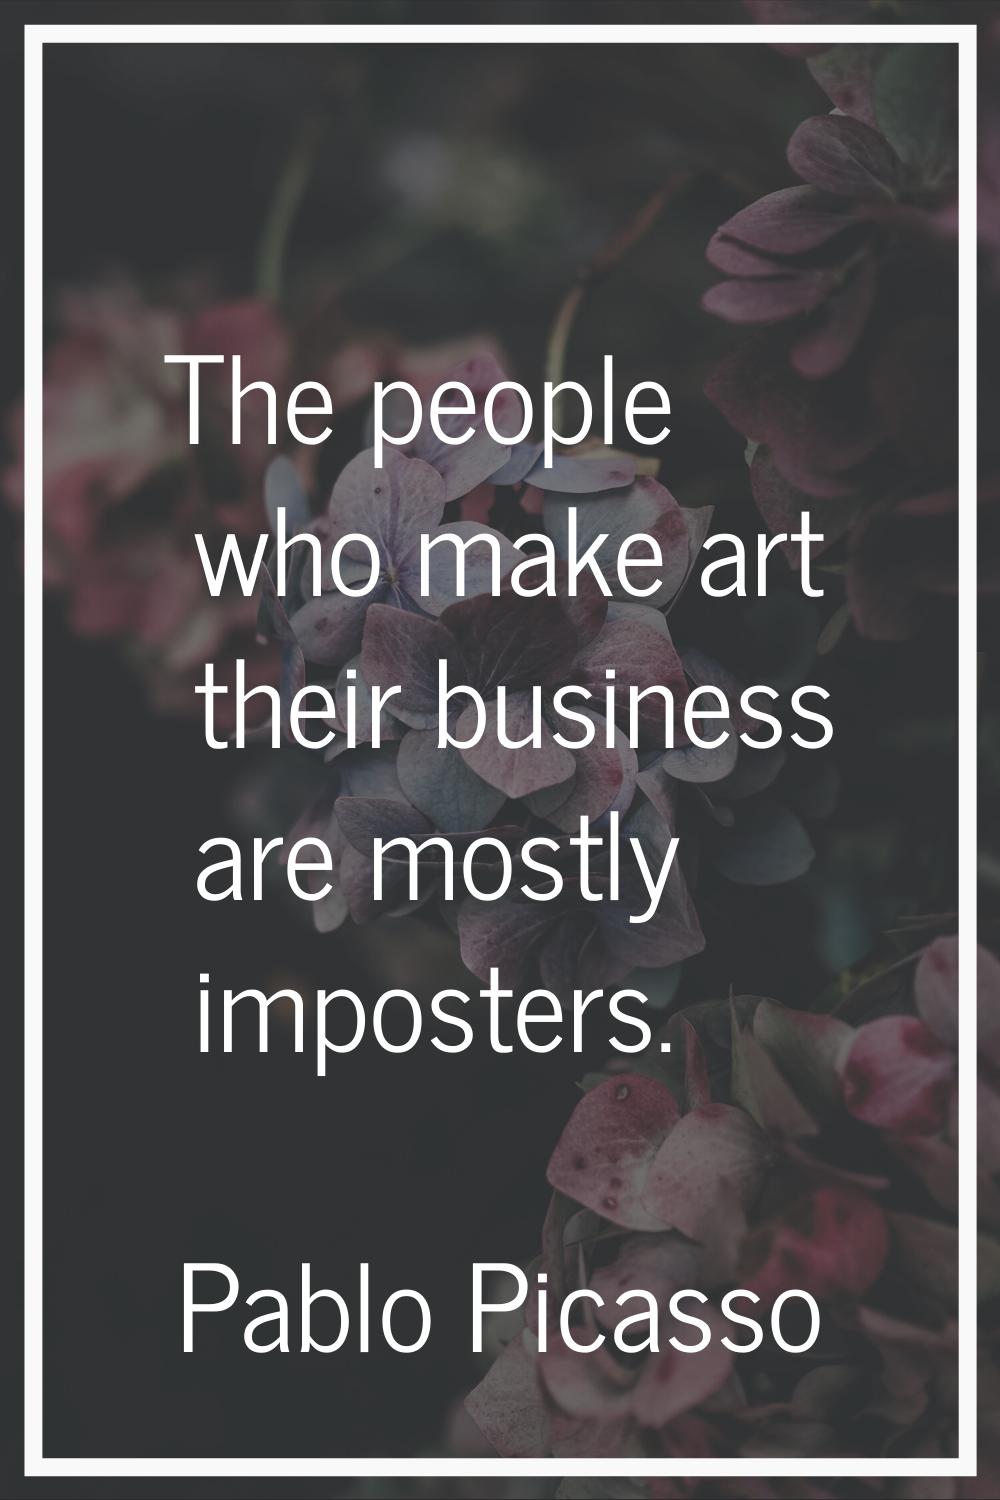 The people who make art their business are mostly imposters.